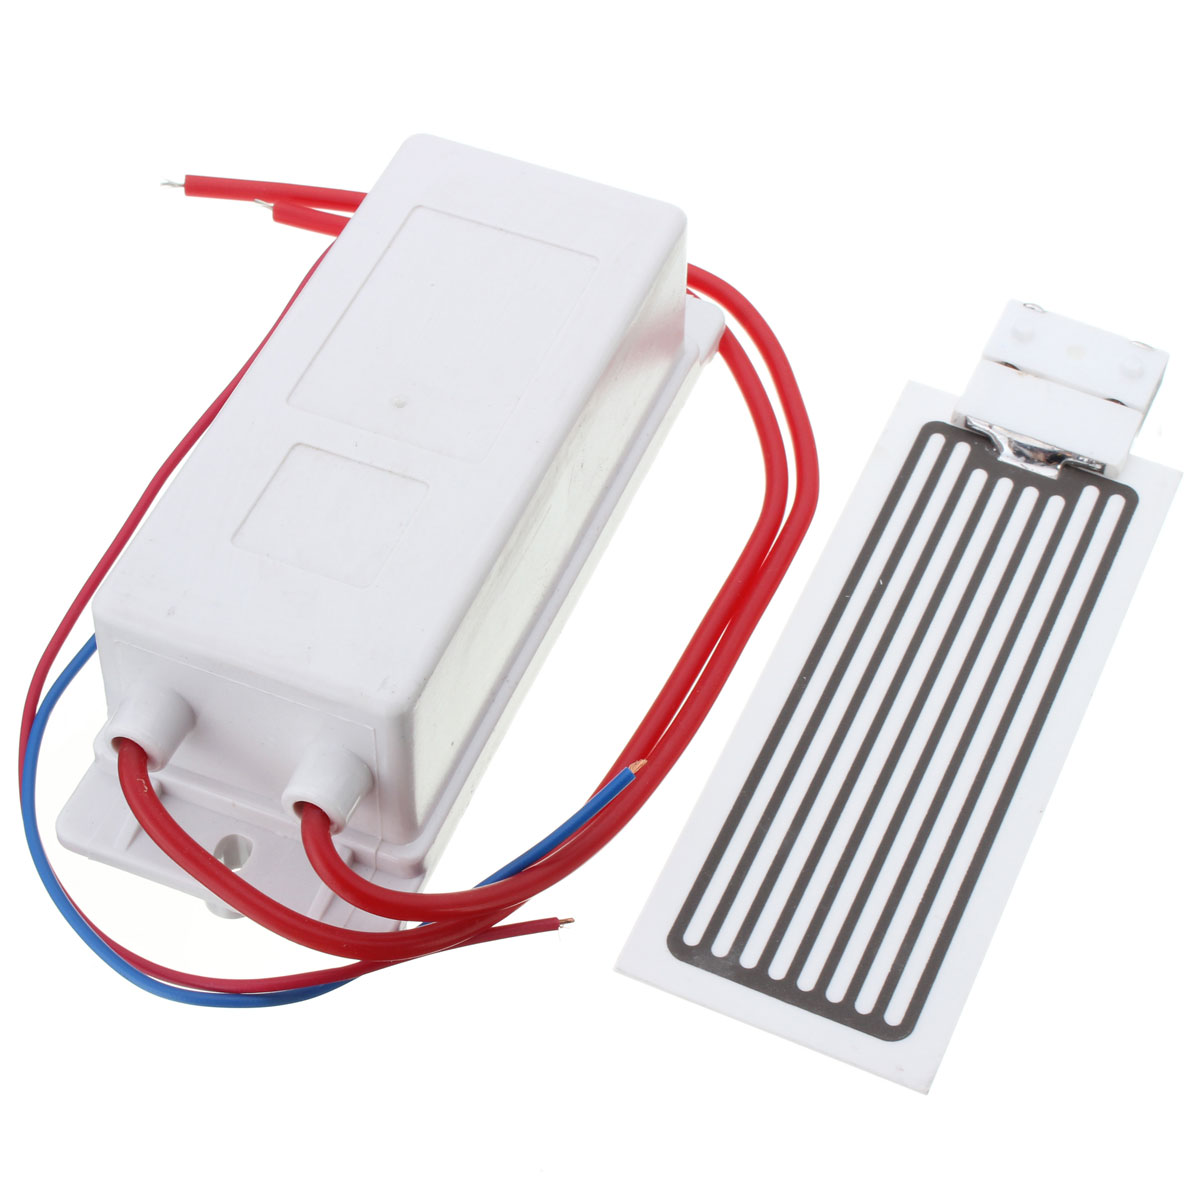 220V-10g-Ozonater-Ozone-Generator-with-Ceramic-Plate-For-Water-Plant-Air-Cleaner-988022-5